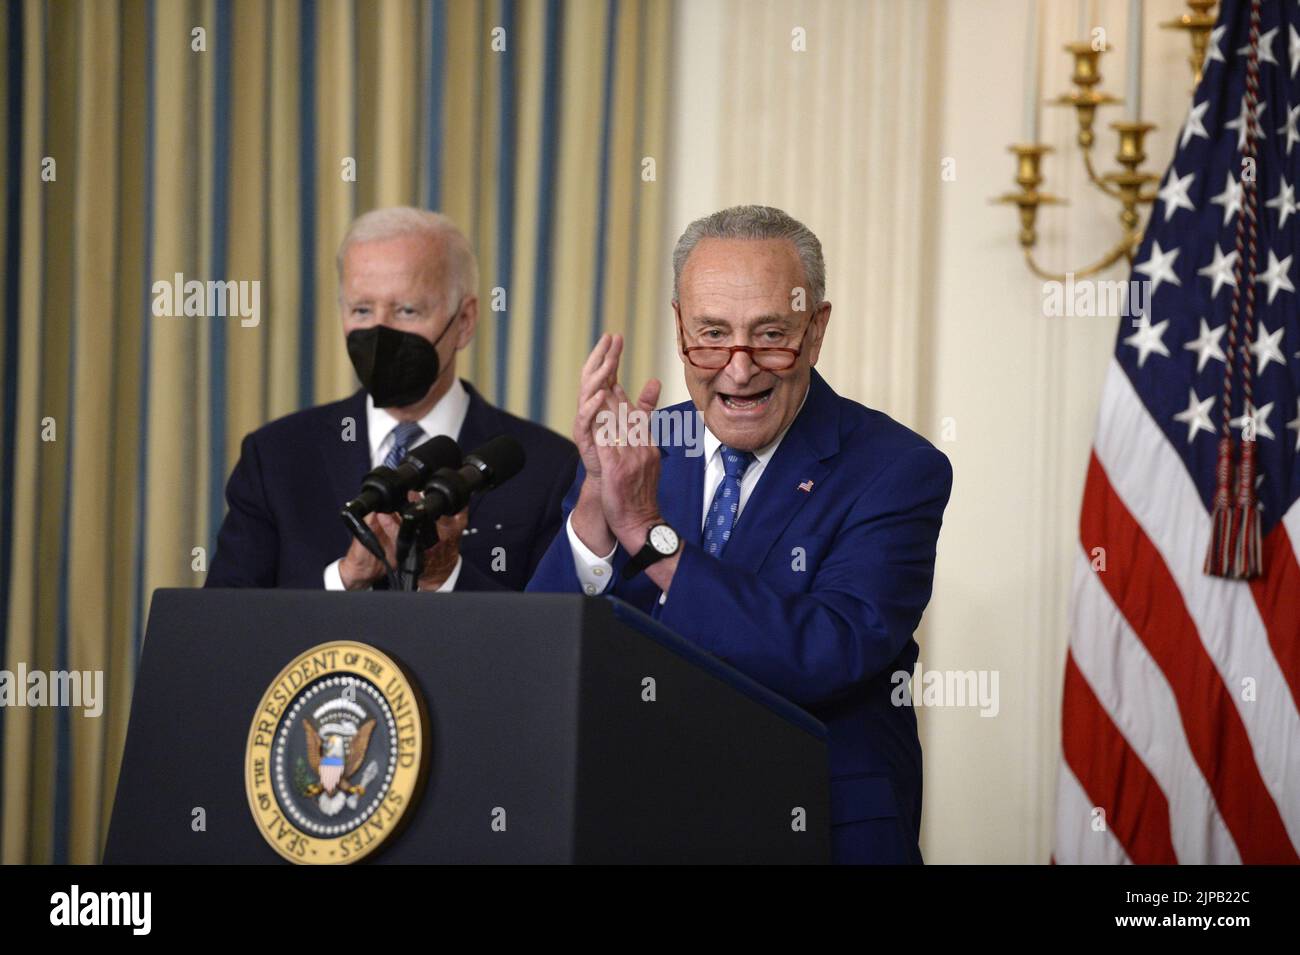 Washington, United States. 16th Aug, 2022. Senate Majority Leader Chuck Schumer, D-NY, speaks as President Joe Biden looks on during a bill signing ceremony for the Inflation Reduction Act of 2022, a $737 billion act focused on slowing climate change, lowering health care costs and creating more clean energy jobs, in the State Dining Room at the White House in Washington, DC on Tuesday, August 16, 2022. Photo by Bonnie Cash/UPI Credit: UPI/Alamy Live News Stock Photo